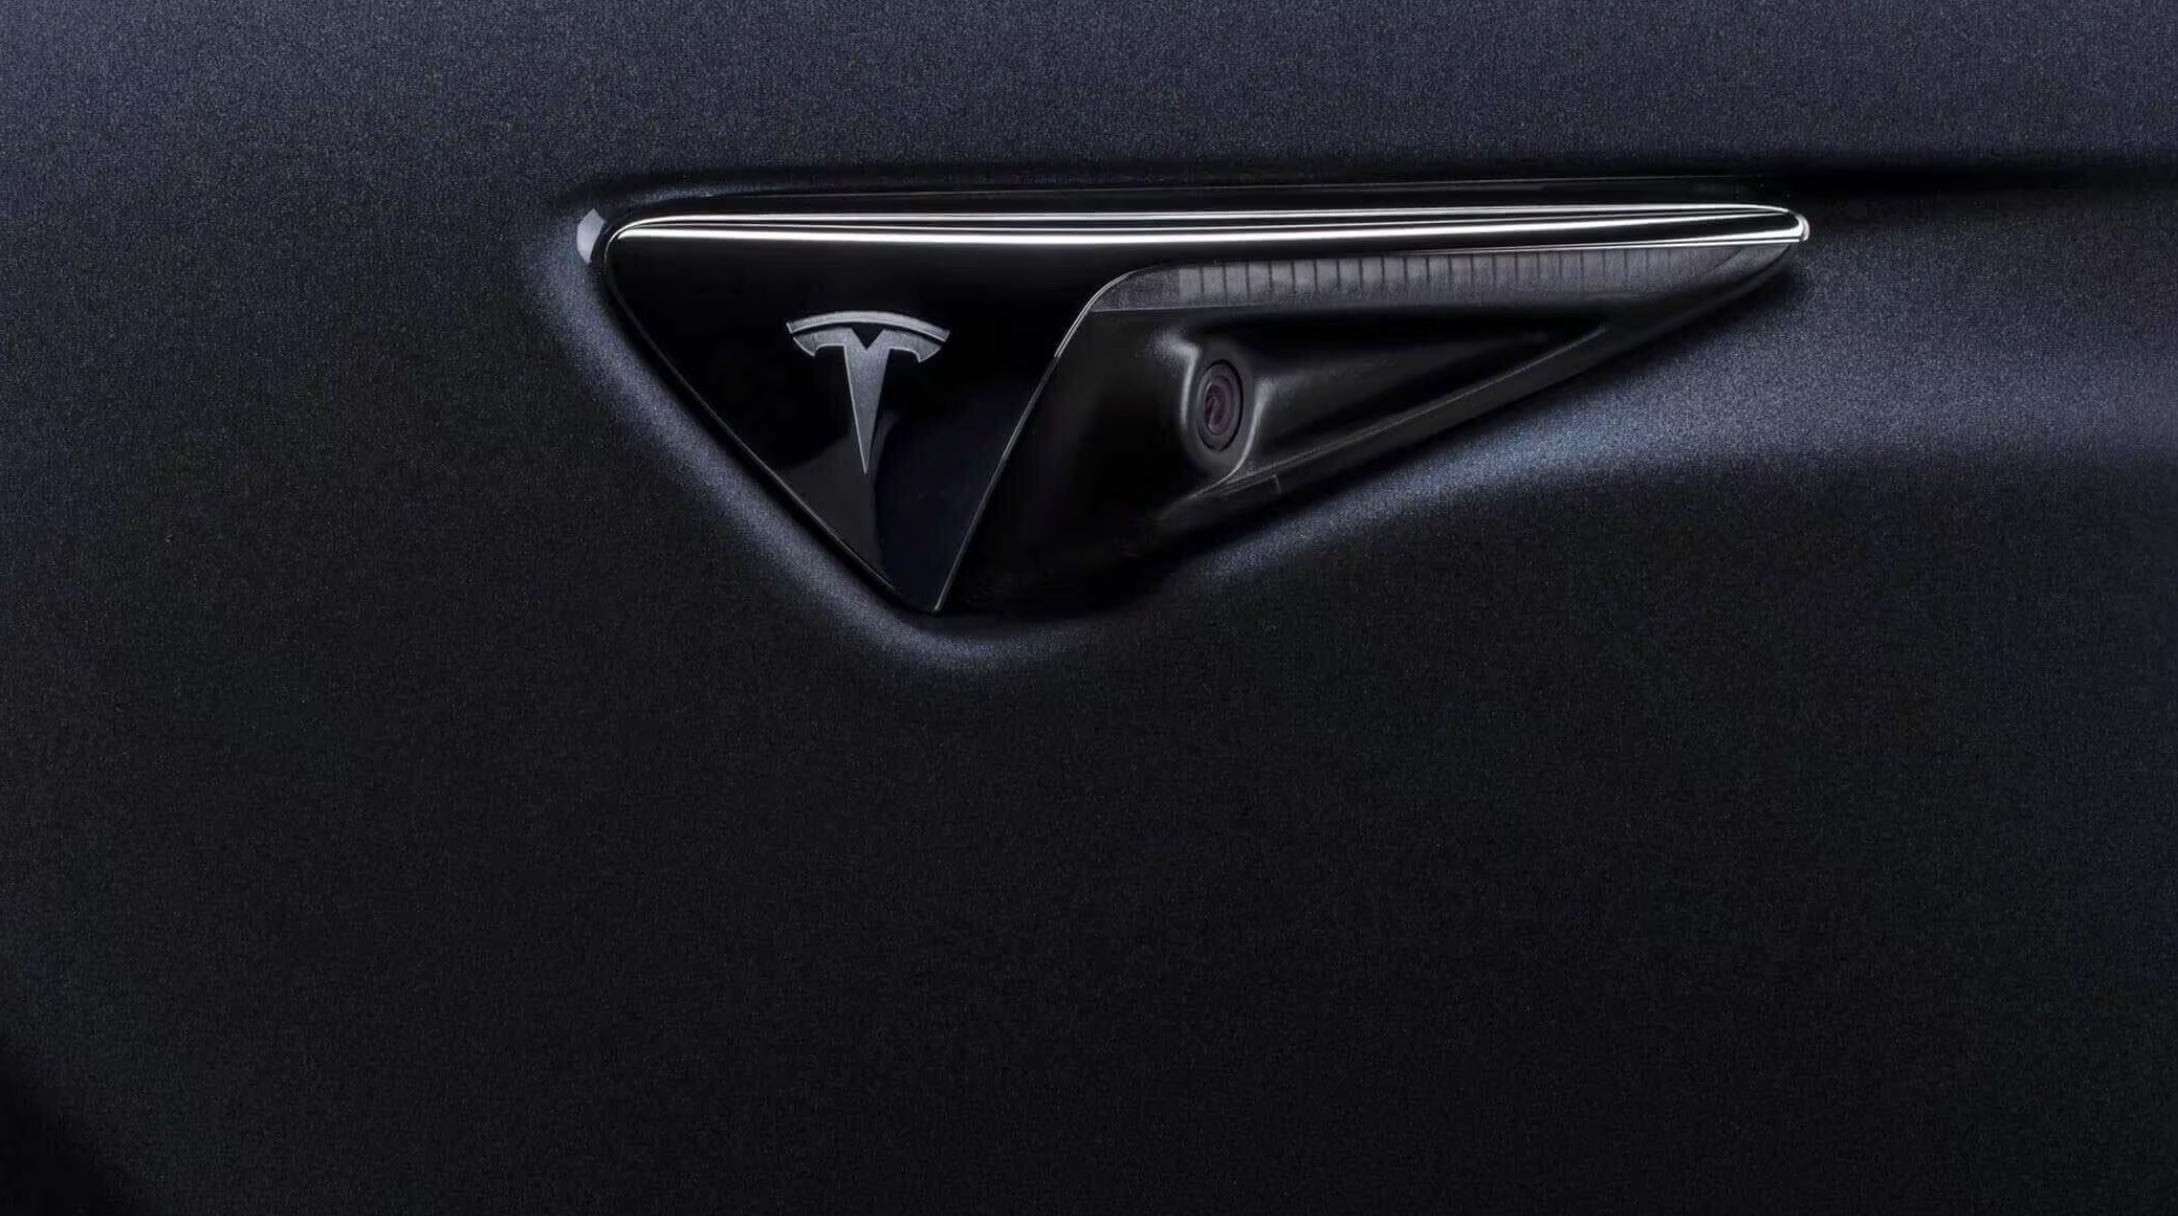 Tesla in early discussions to license Full Self-Driving to ‘major’ automaker